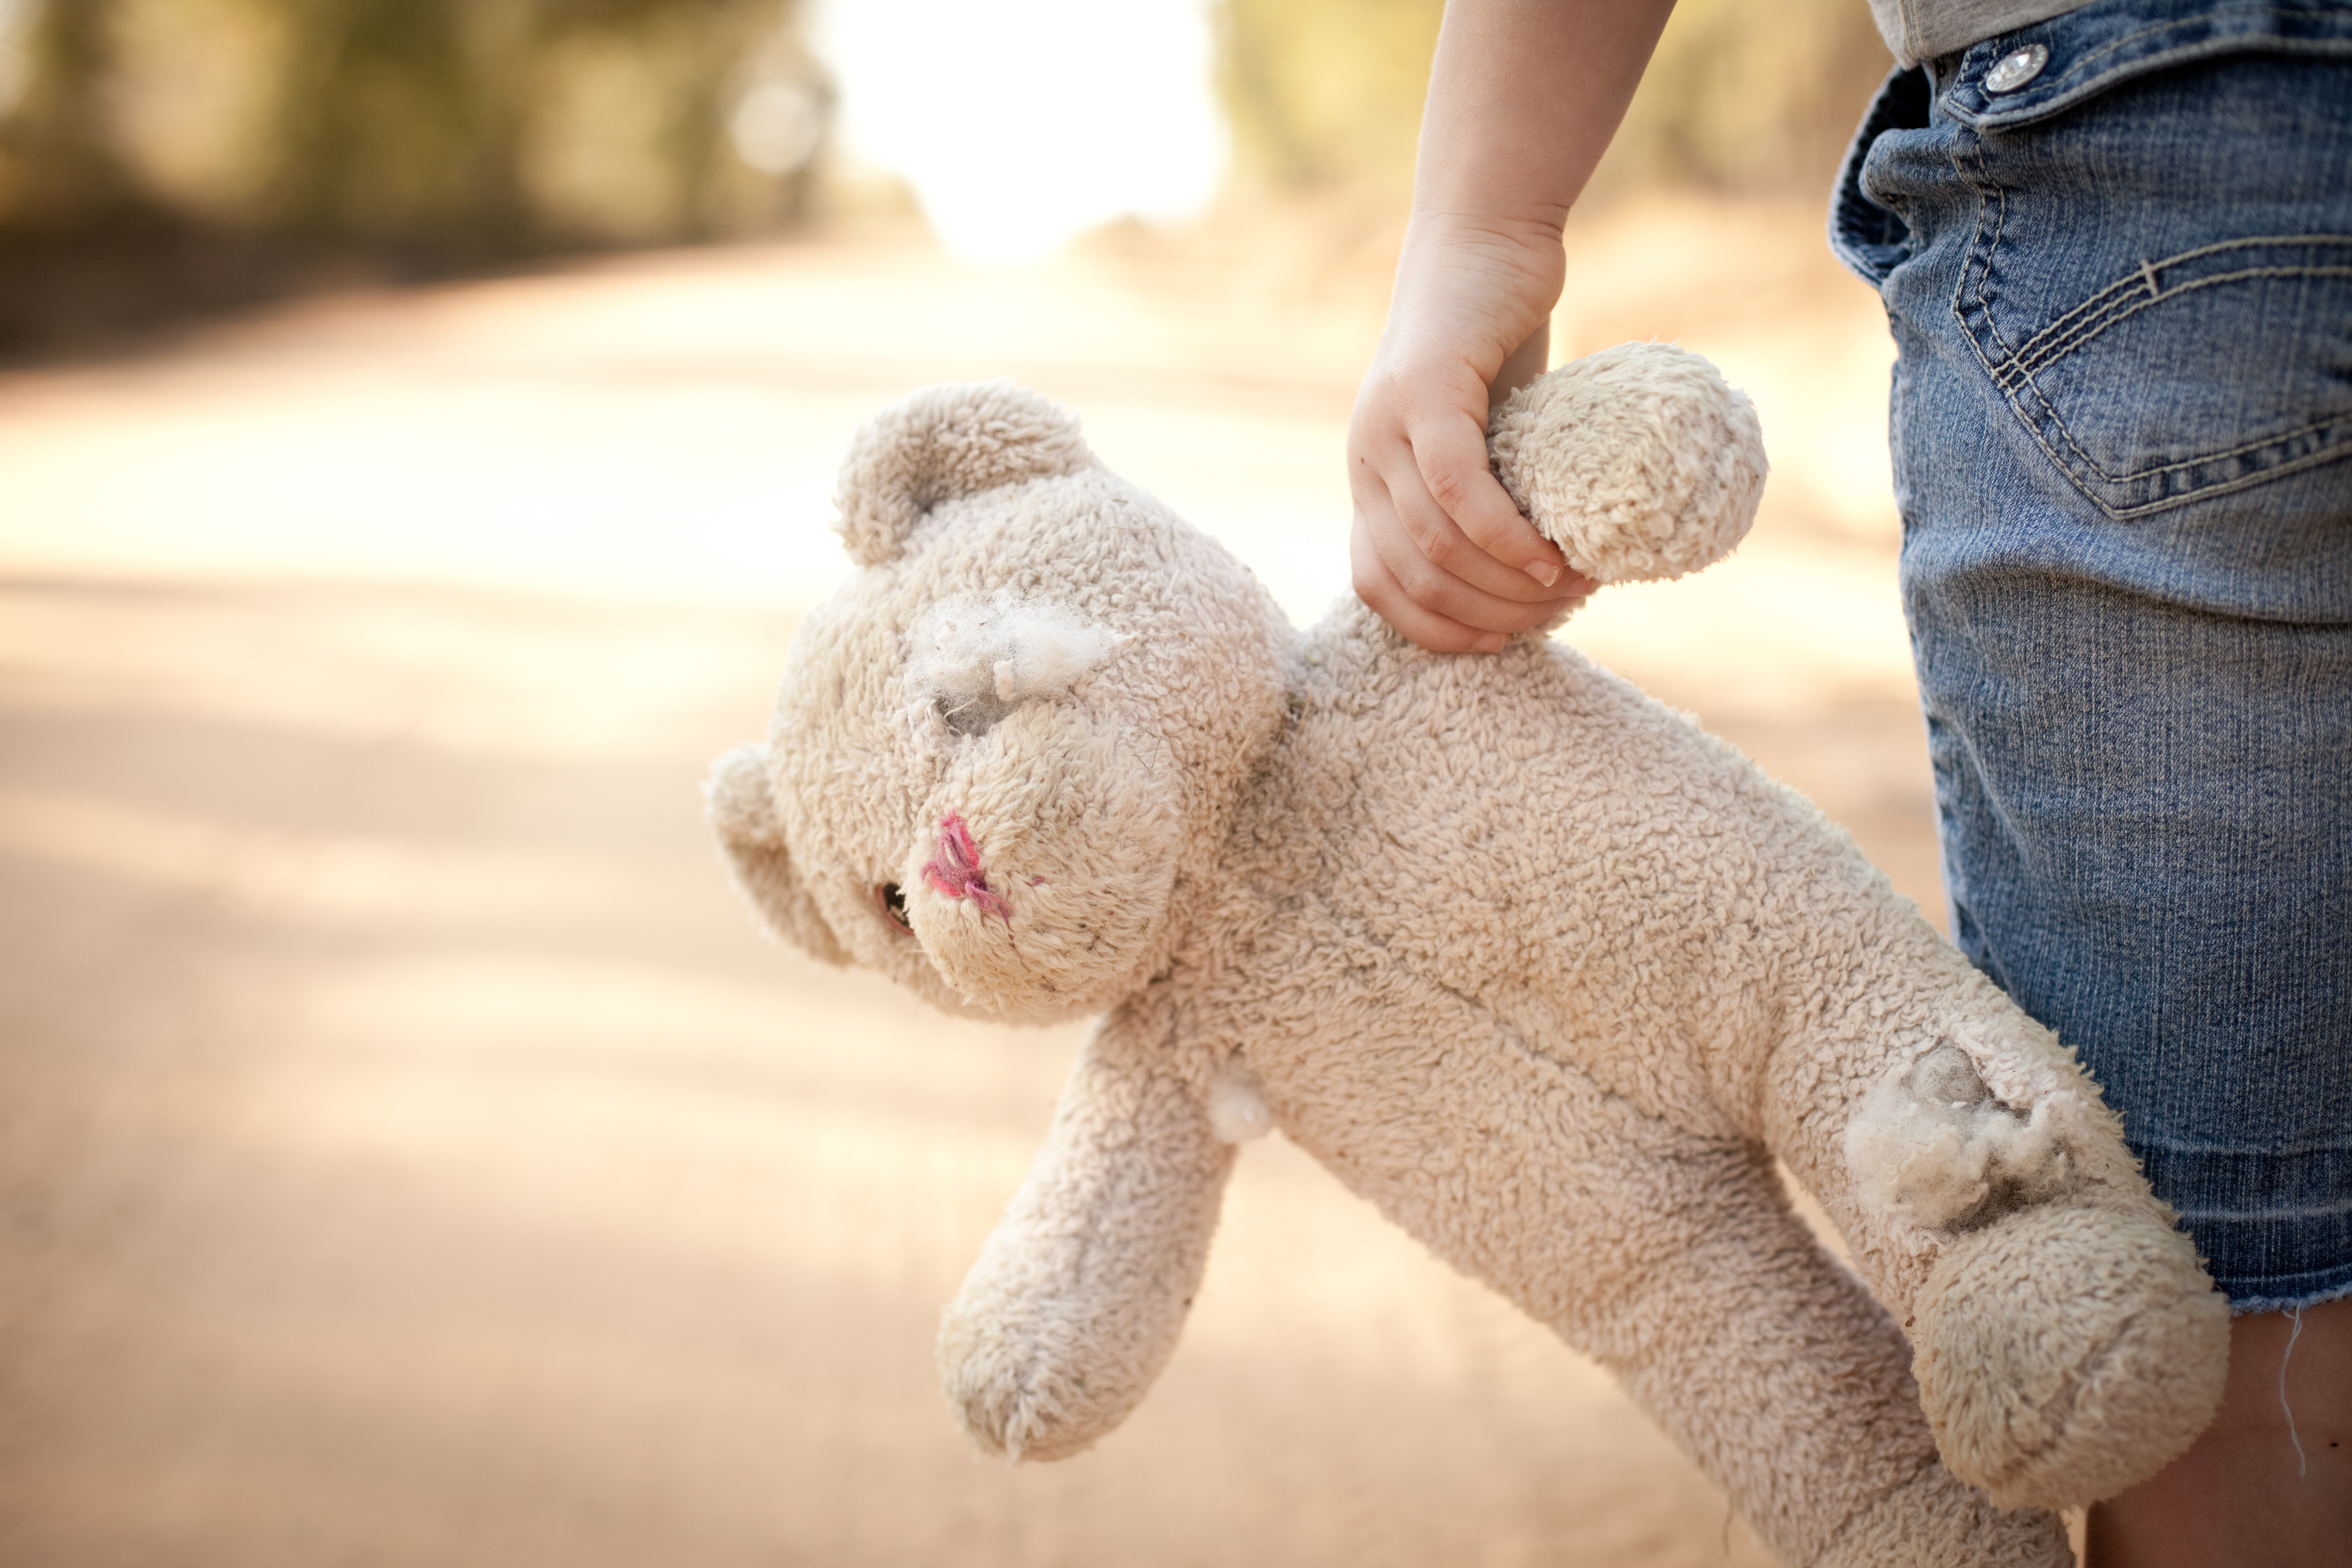 How a $9 teddy bear can help your kids cope with grief.